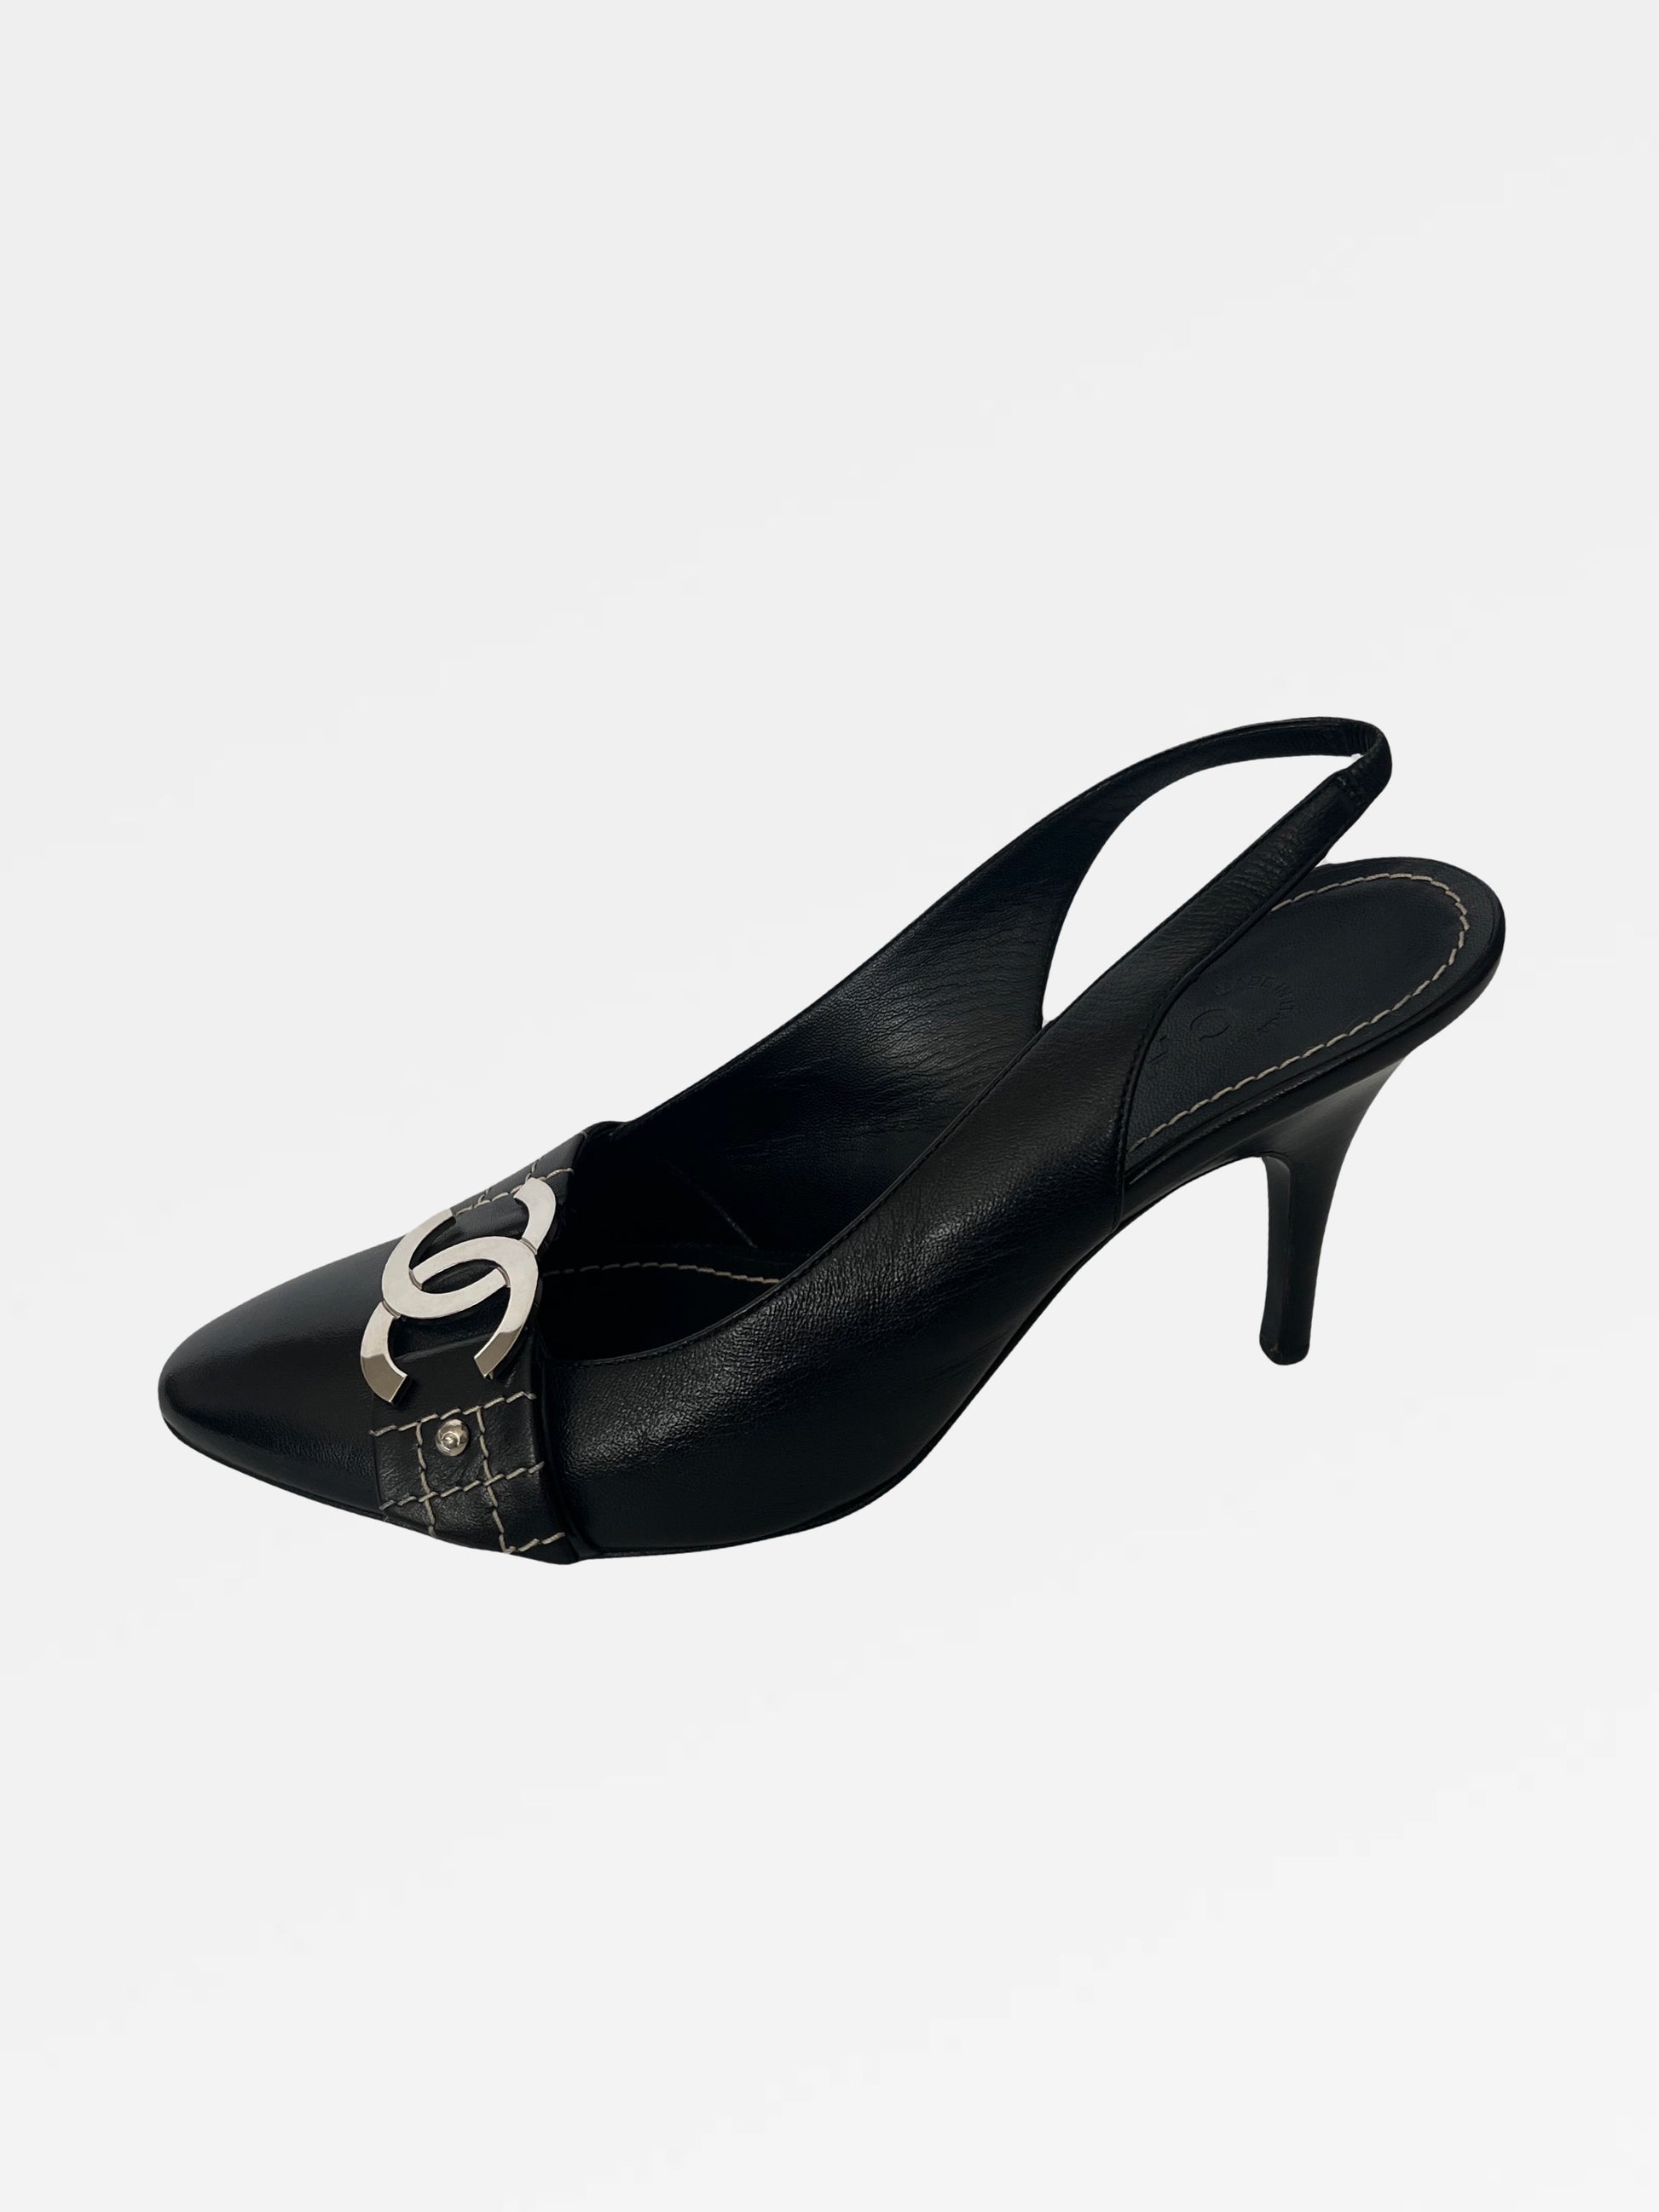 Chanel Slingback Heels Review  FAQs on Comfort, Sizing and Price - Fashion  Jackson